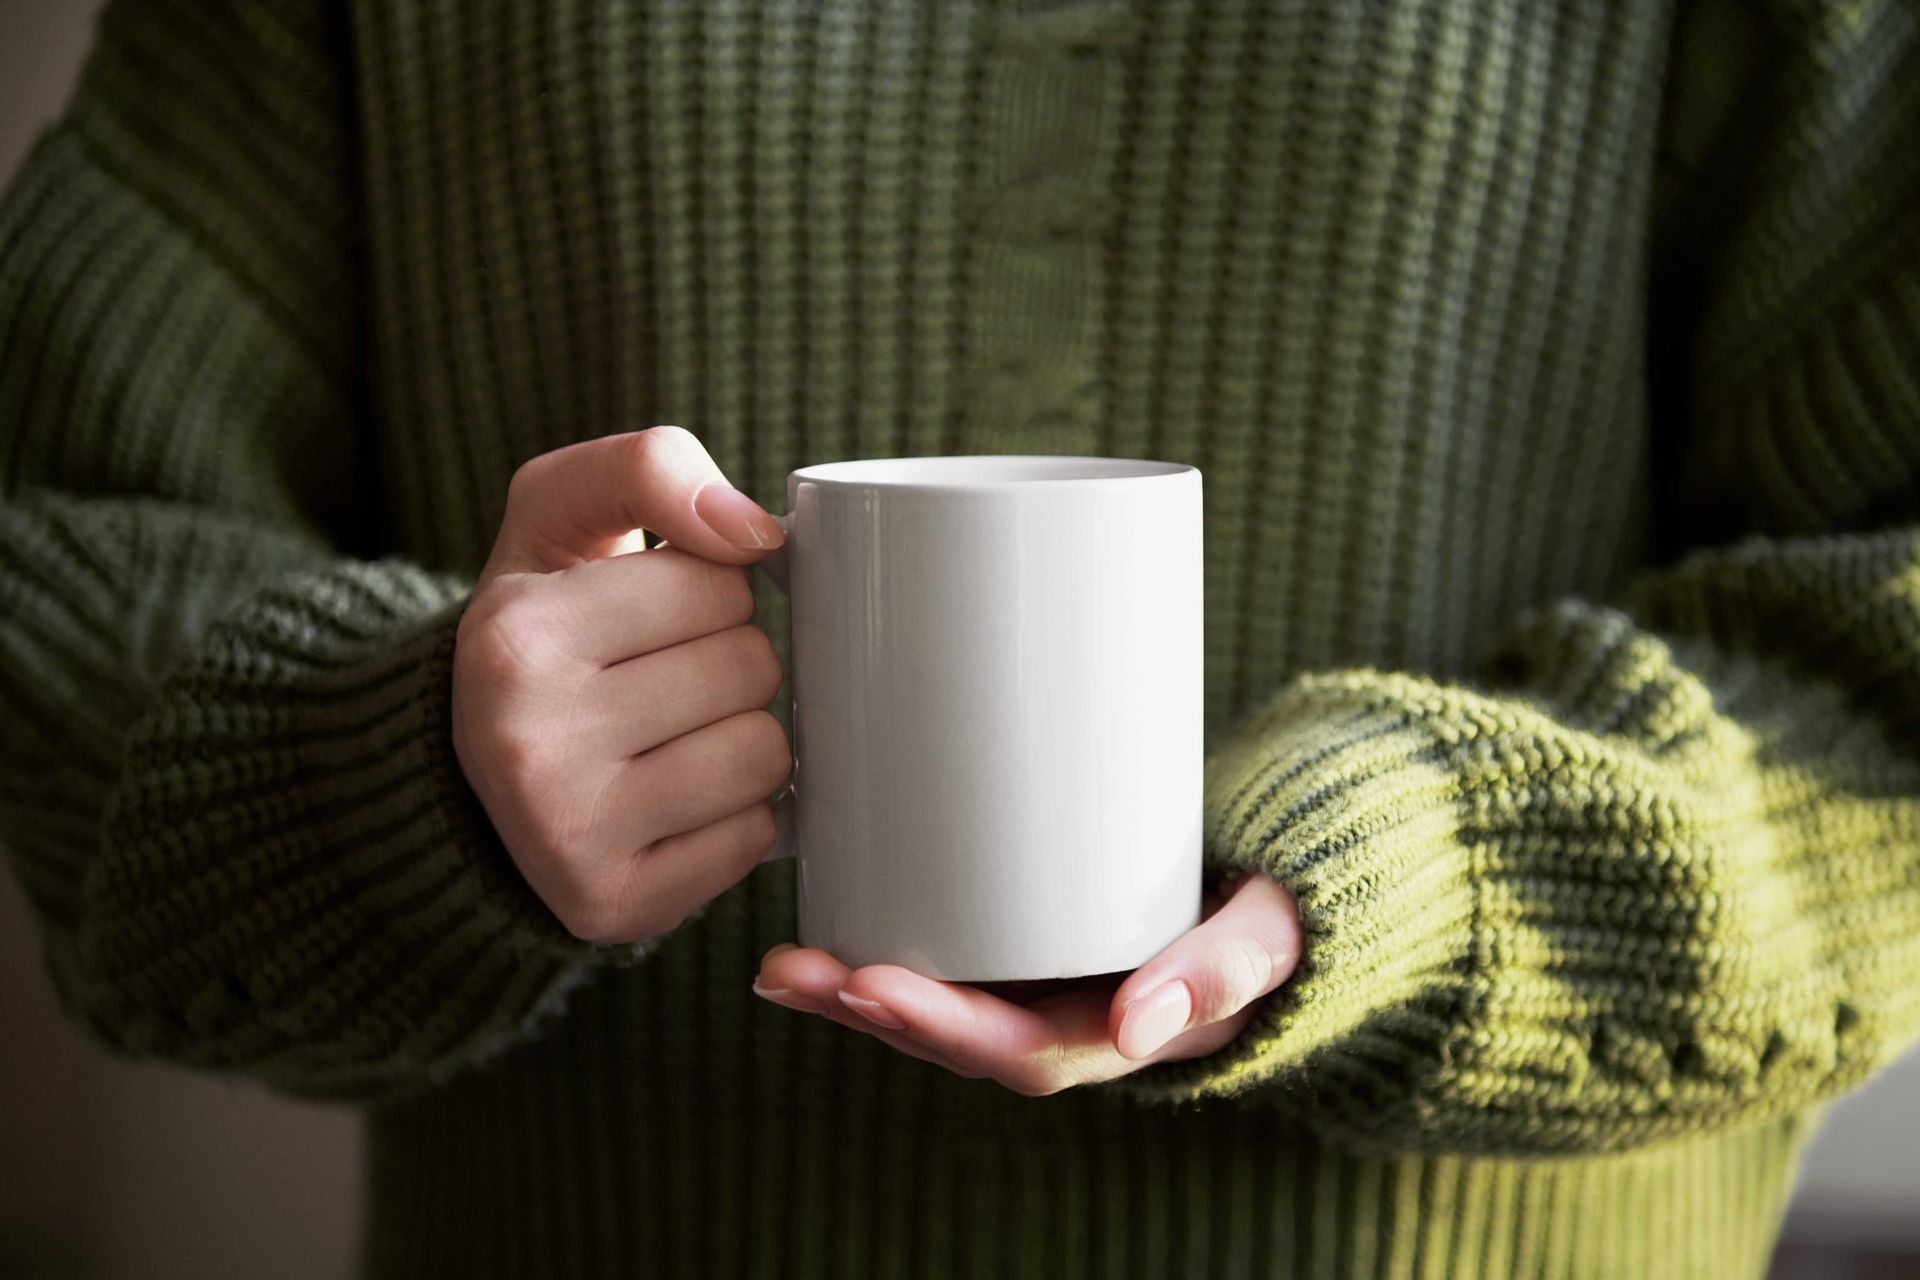 Marketing photo of a person holding a white coffee mug out in front of them